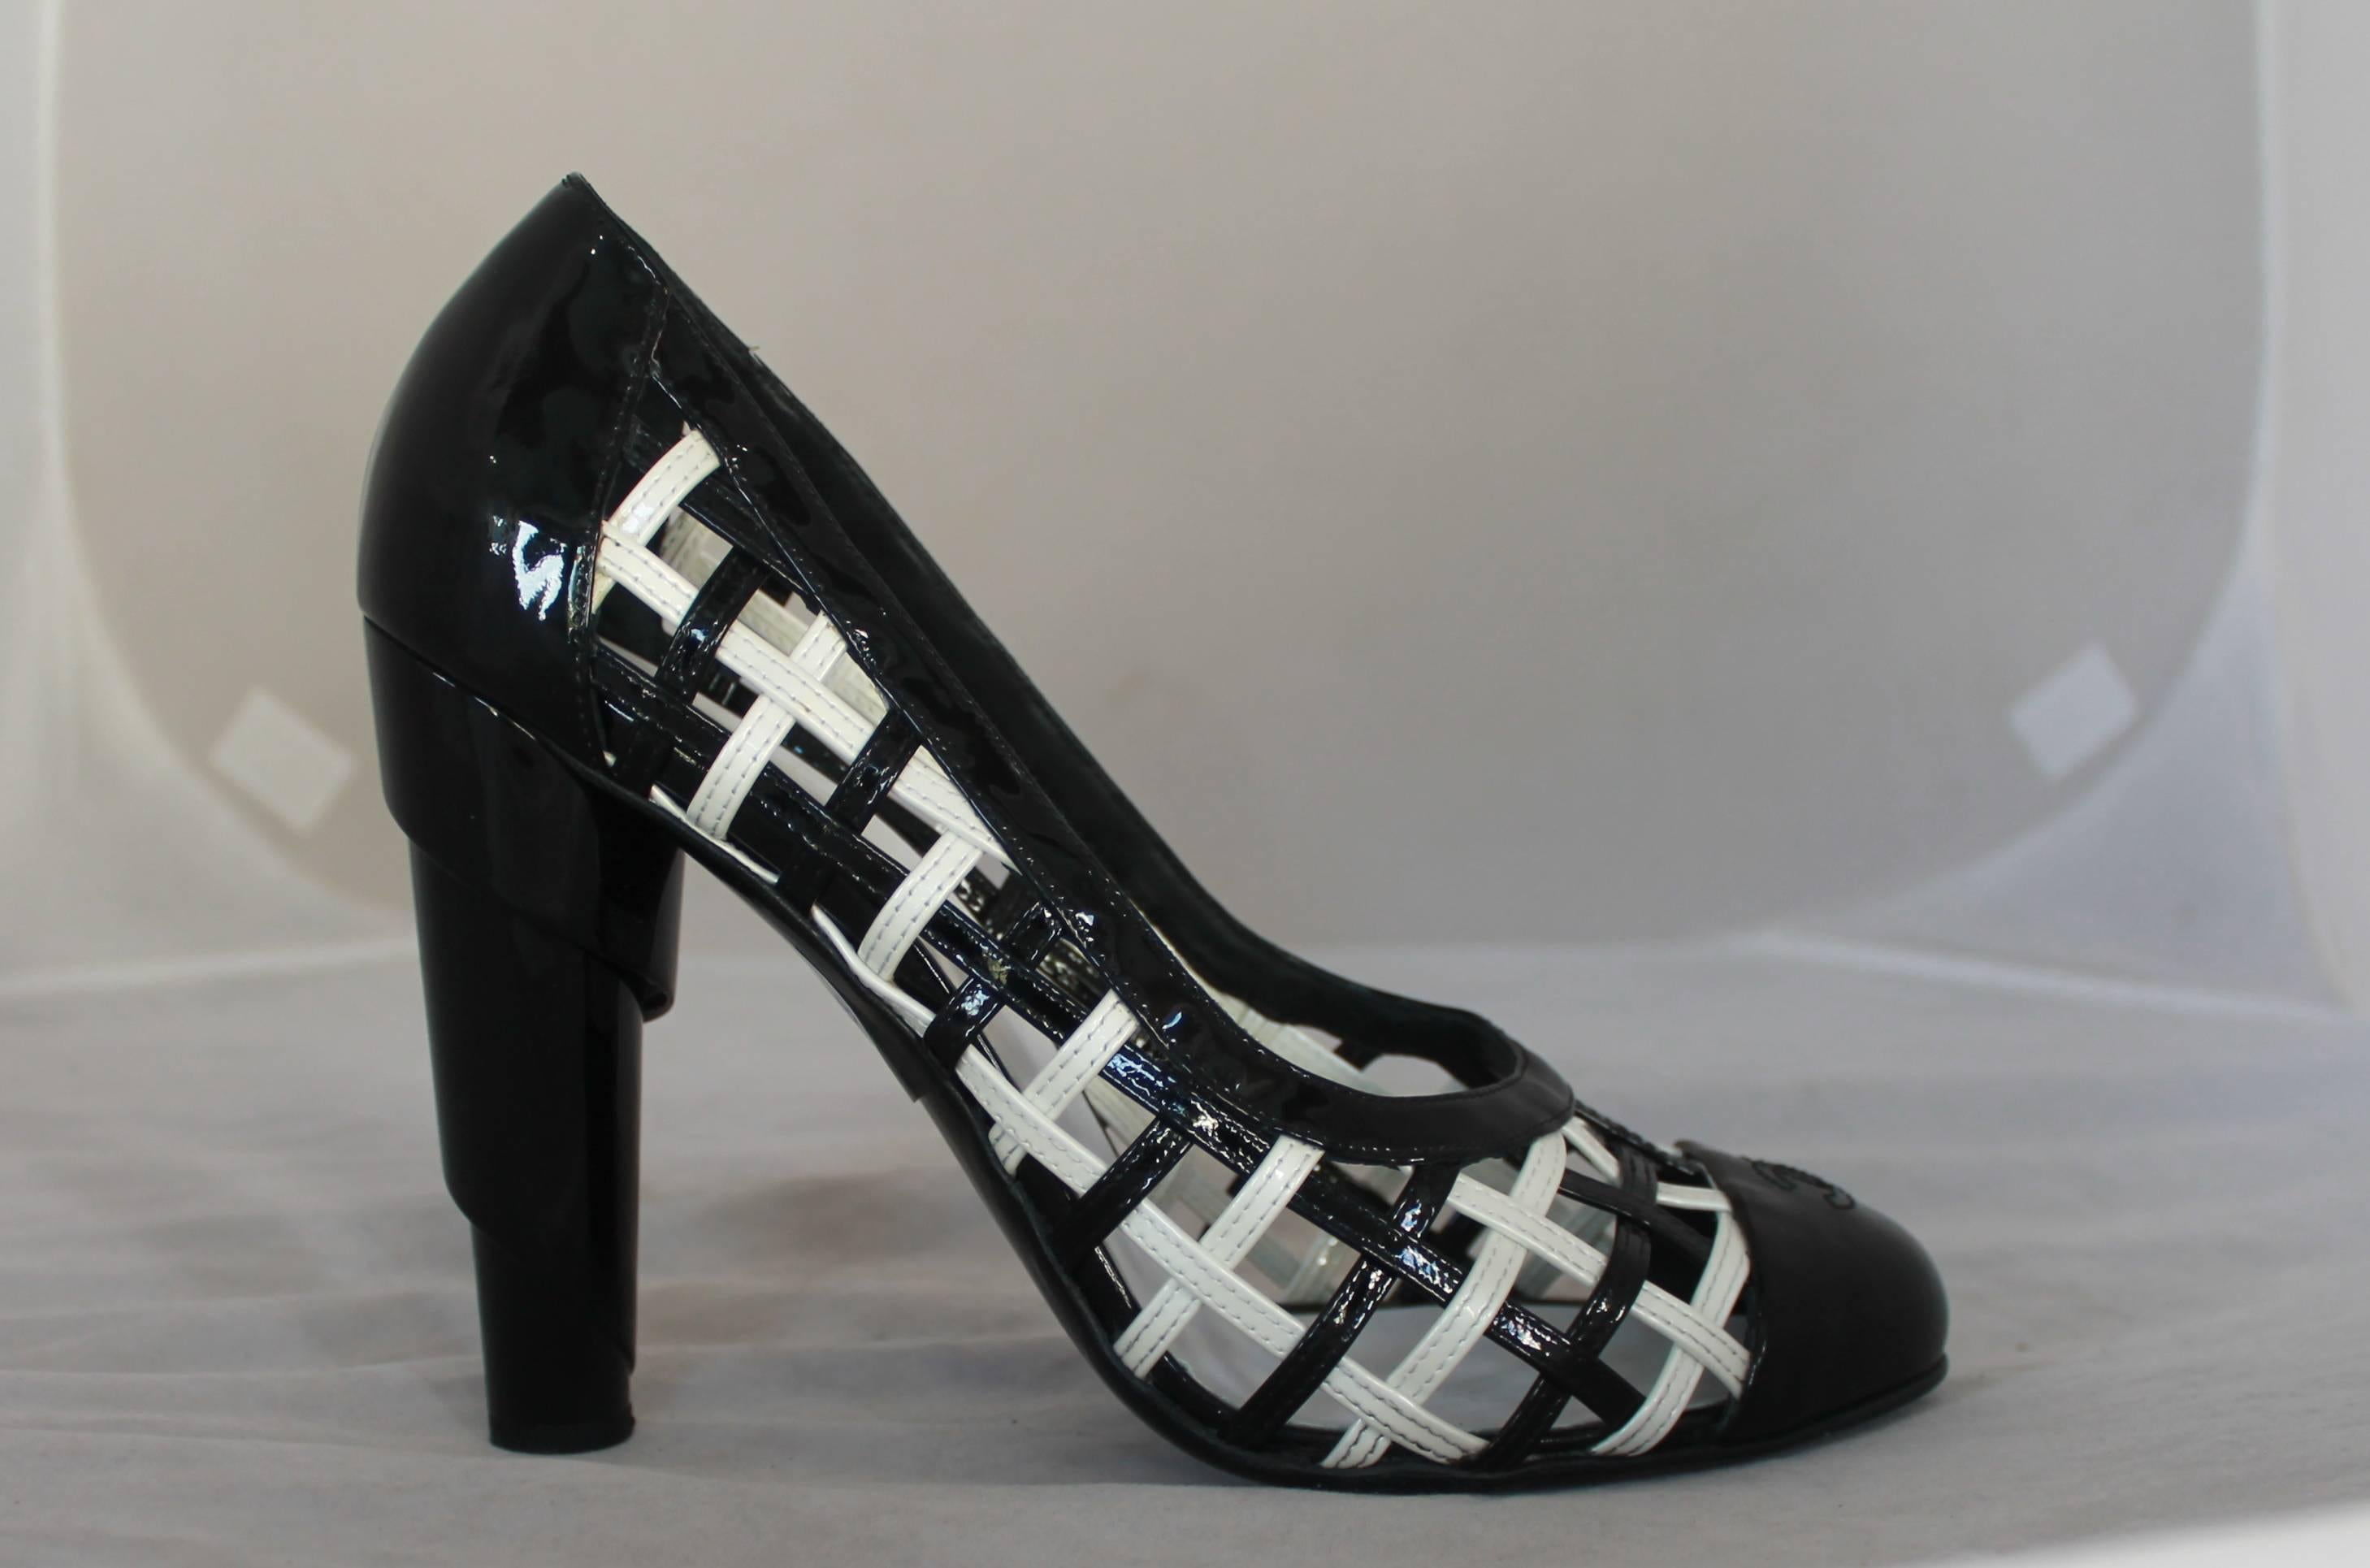 Chanel Black & White Patent Crisscross Pumps w/ Black Toe - 40.5.  These unique pumps are in excellent condition with very minor wear to the sole.  They have a stitched 